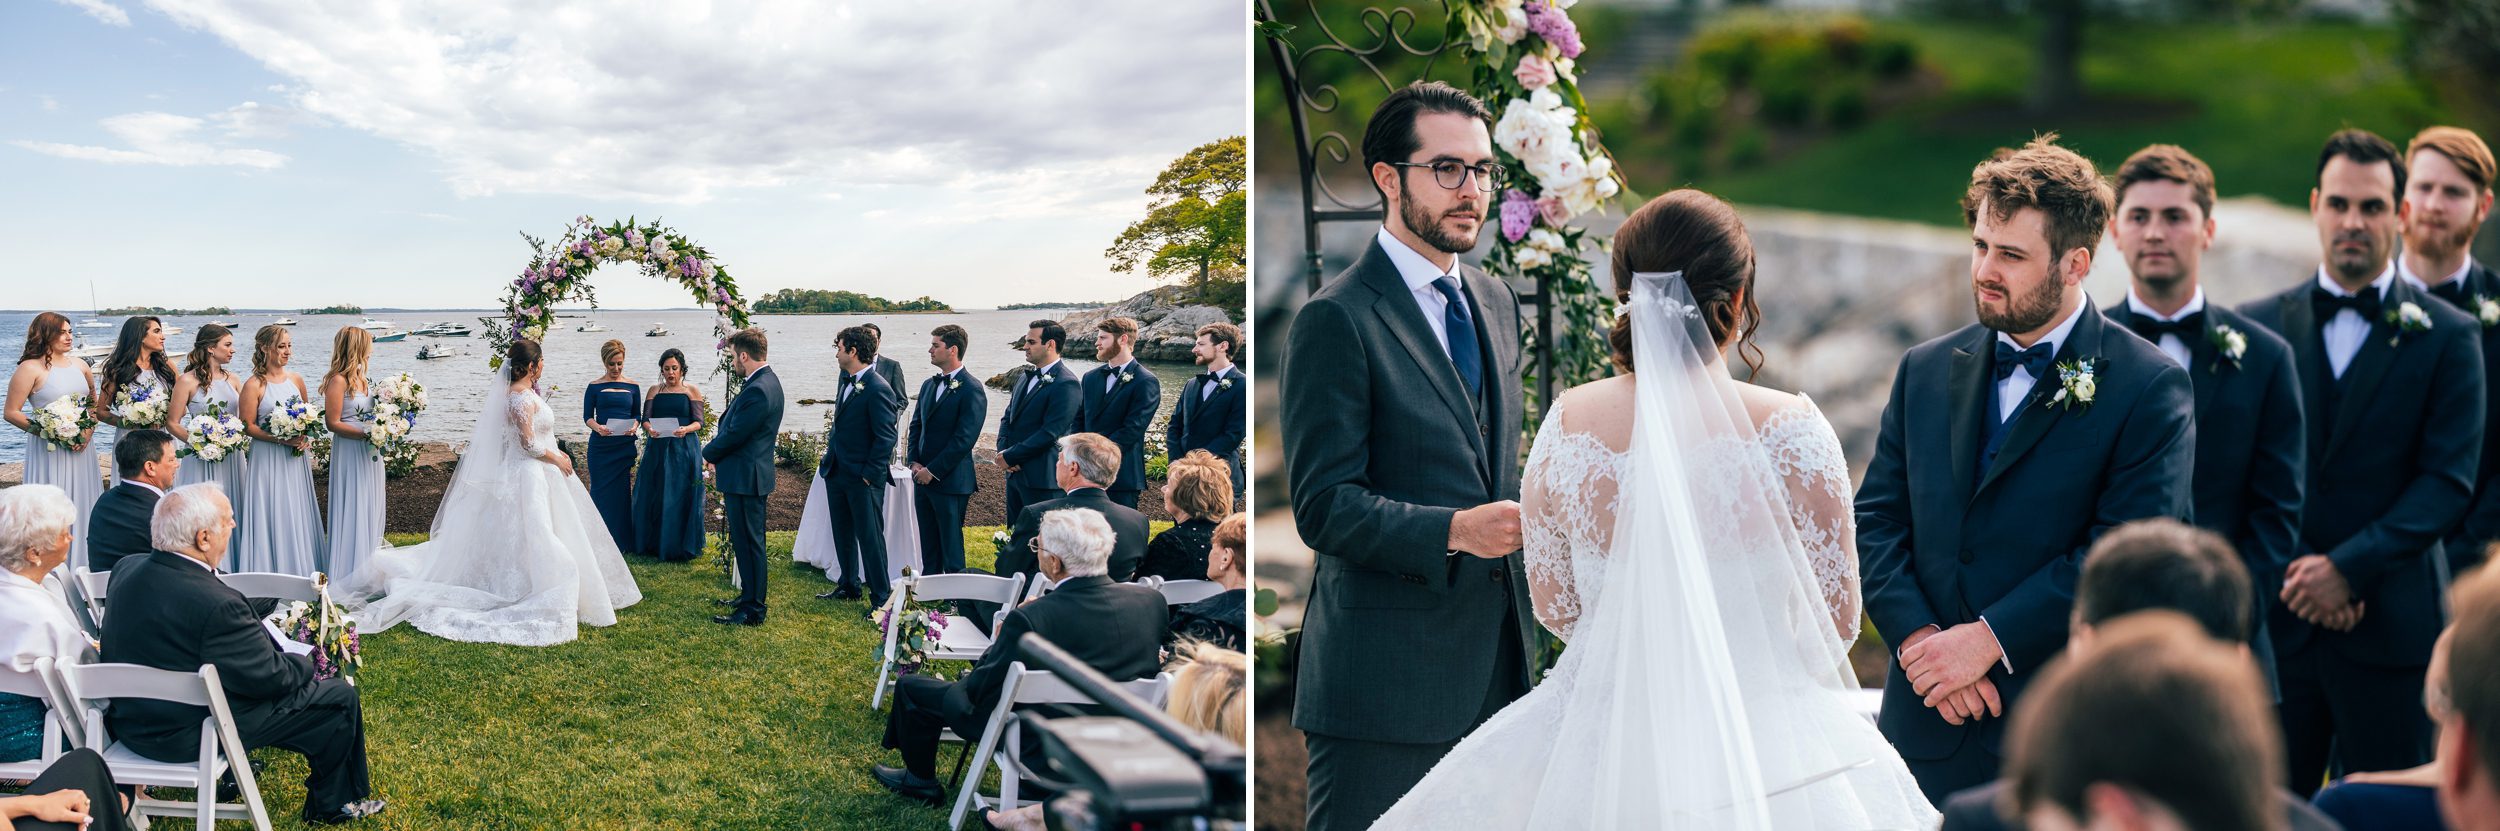 spring wedding in Connecticut